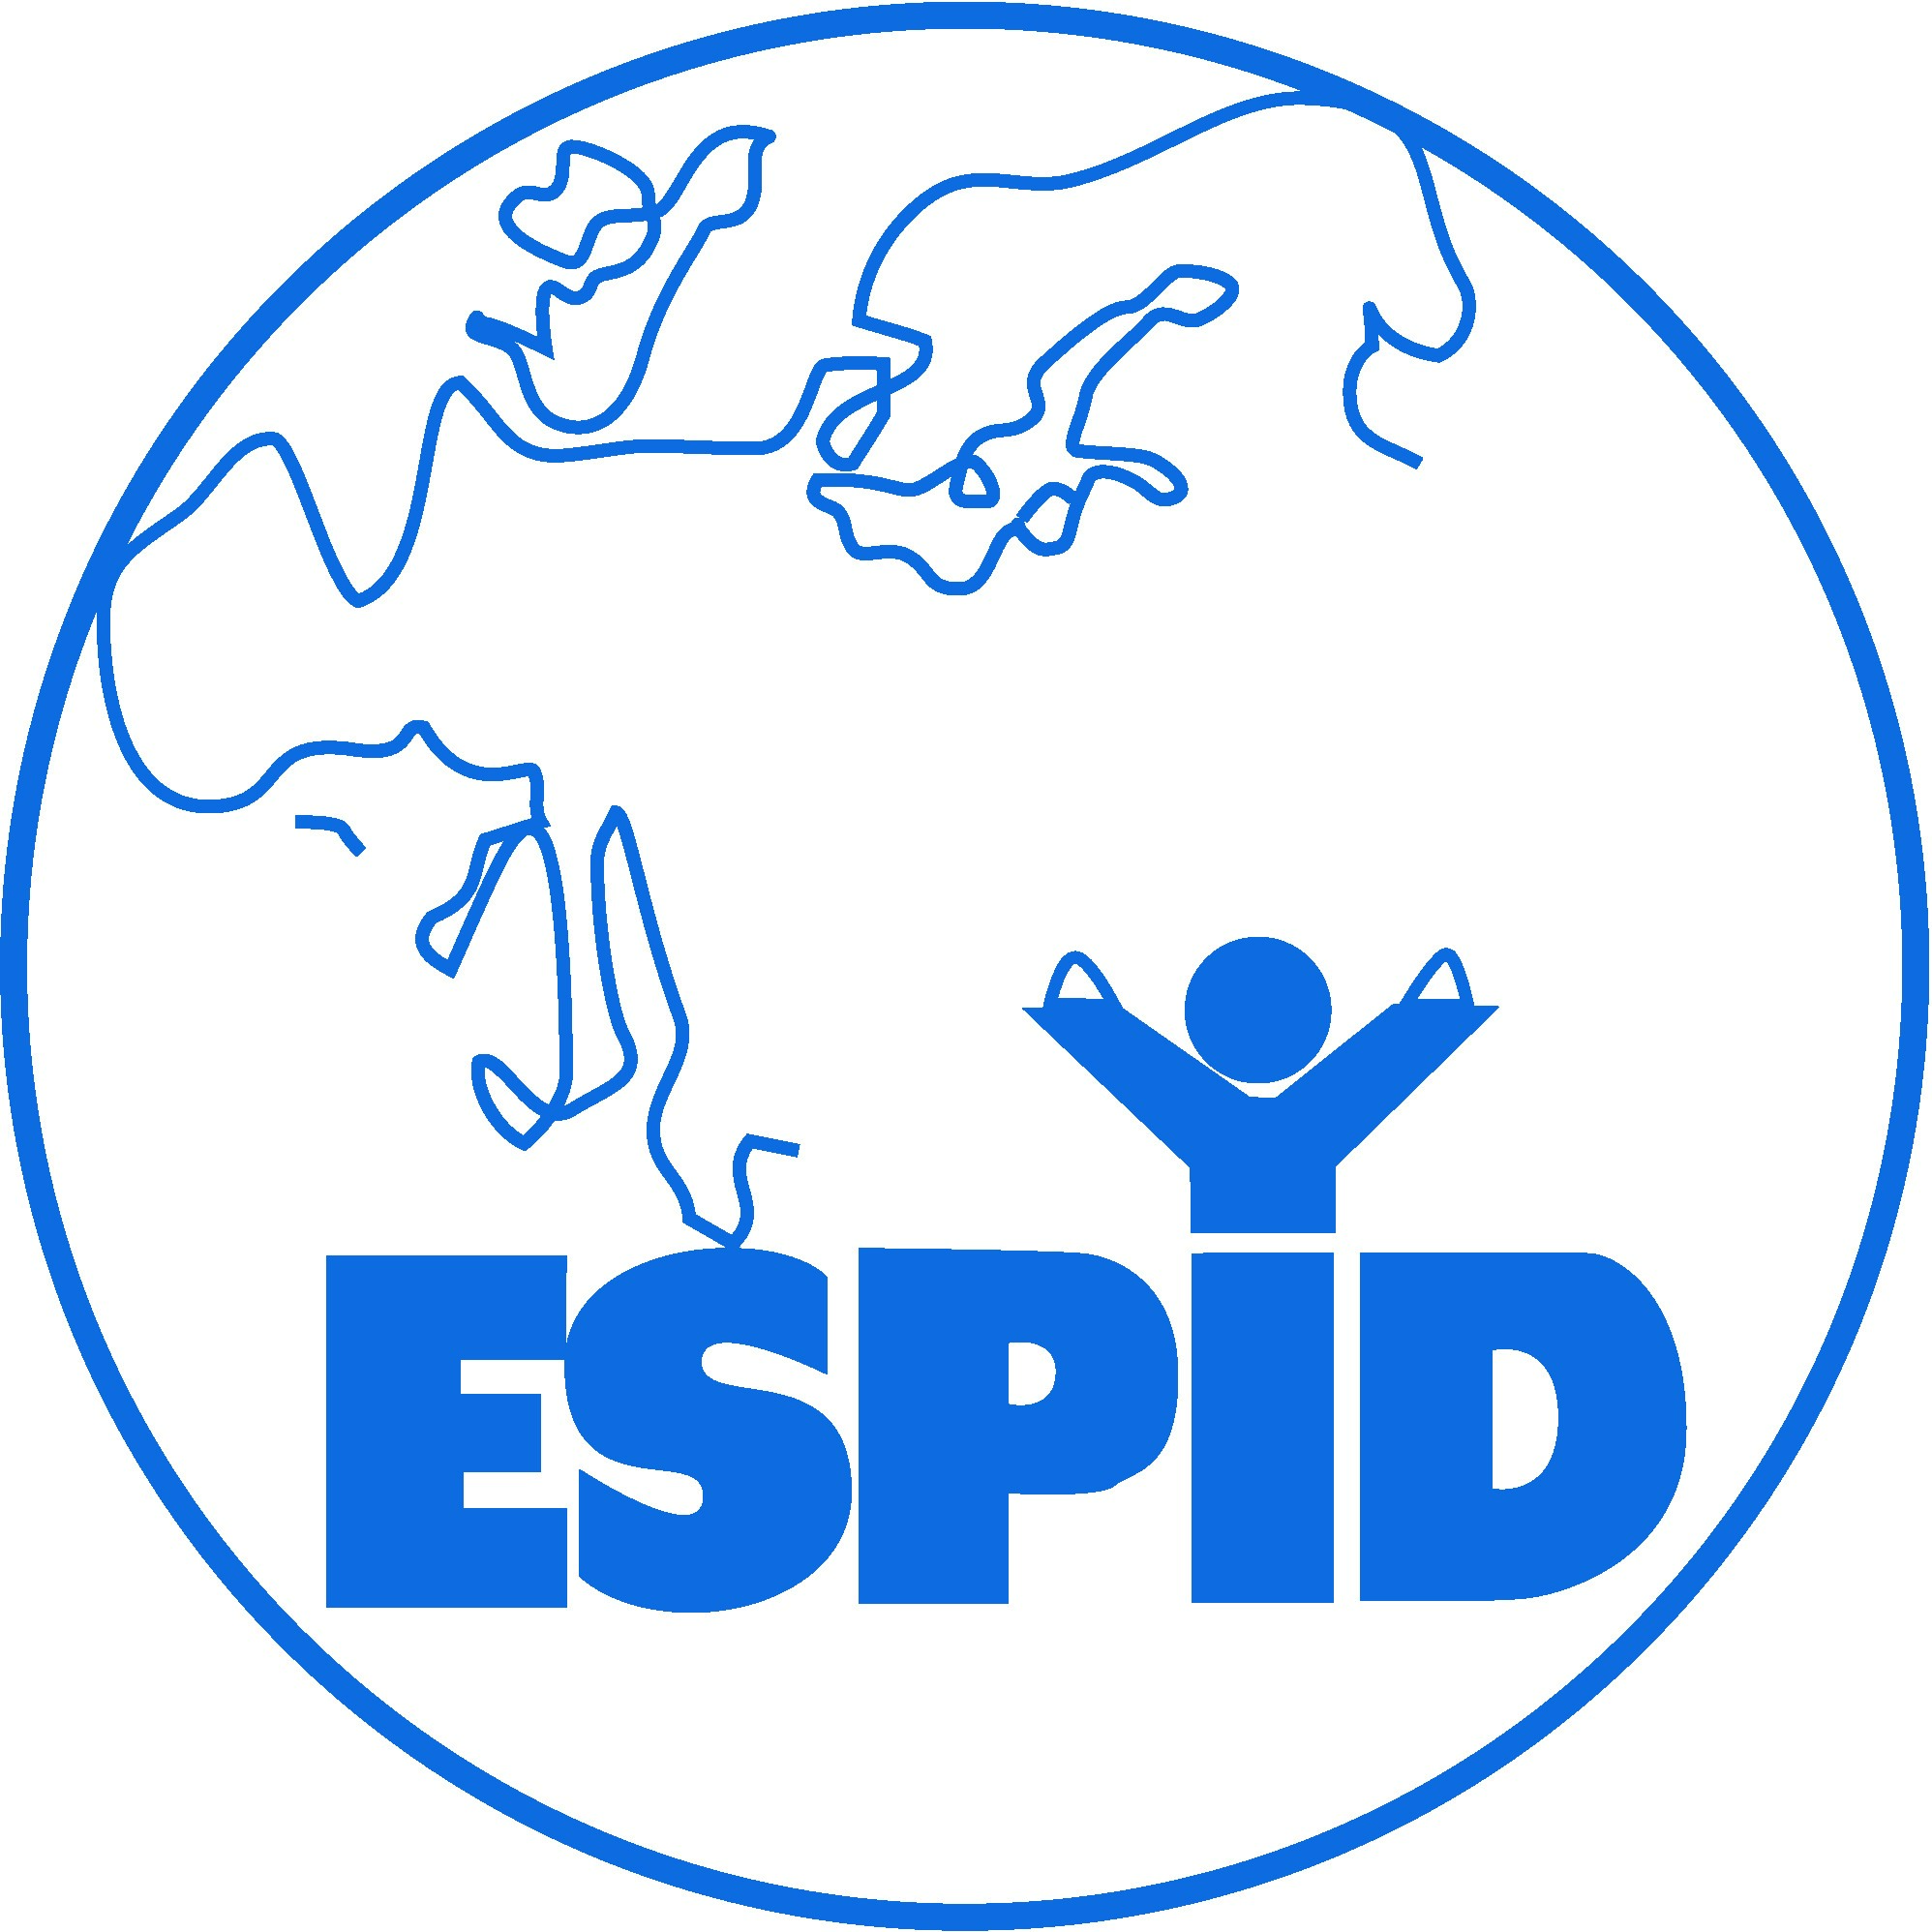 ESPID 2018 - 36th Annual Meeting of the European Society for Paediatric Infectious Diseases